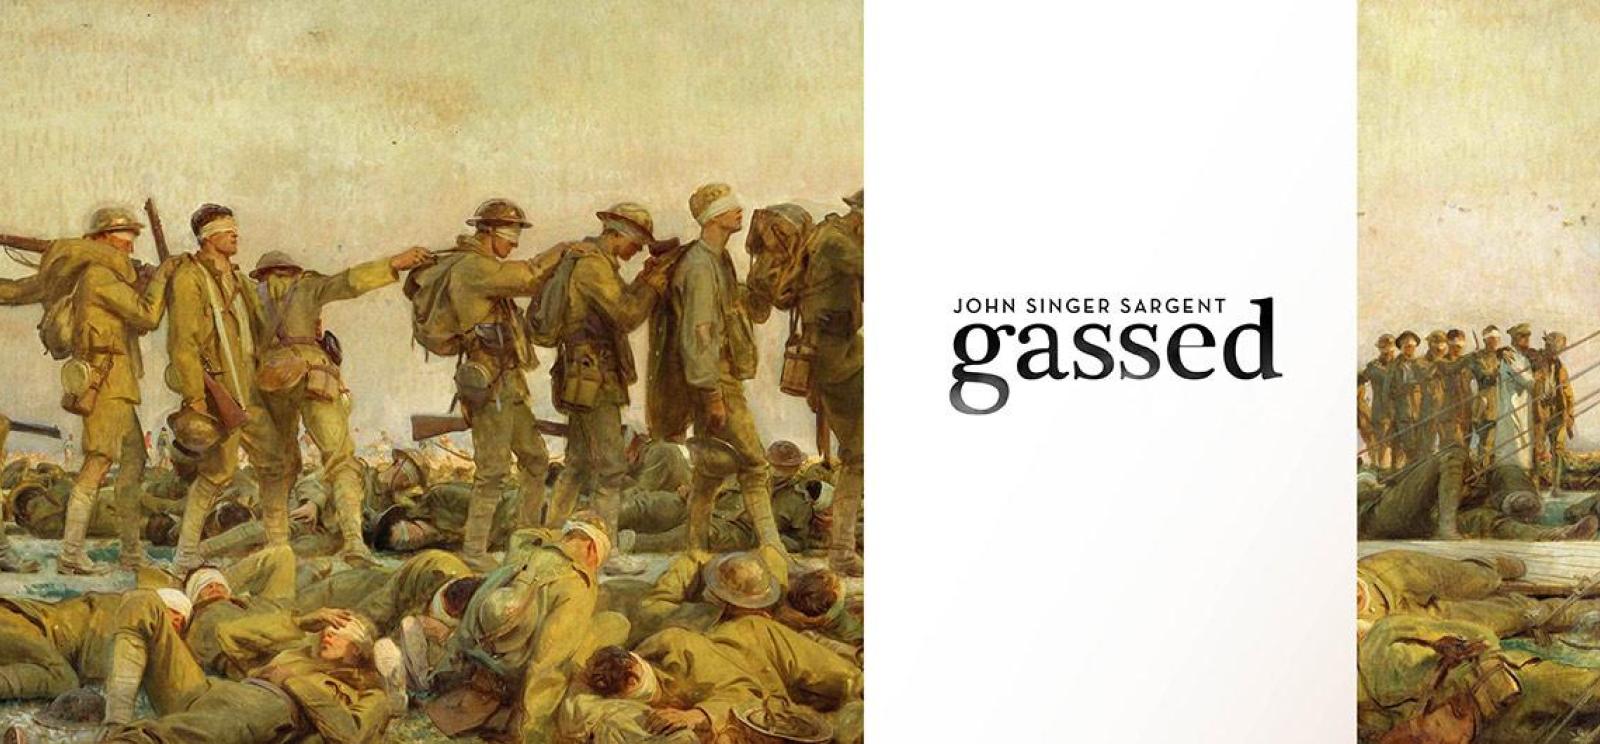 Background image: a fragment of a painting of soldiers maimed by a gas attack. Text: John Singer Sargent's Gassed